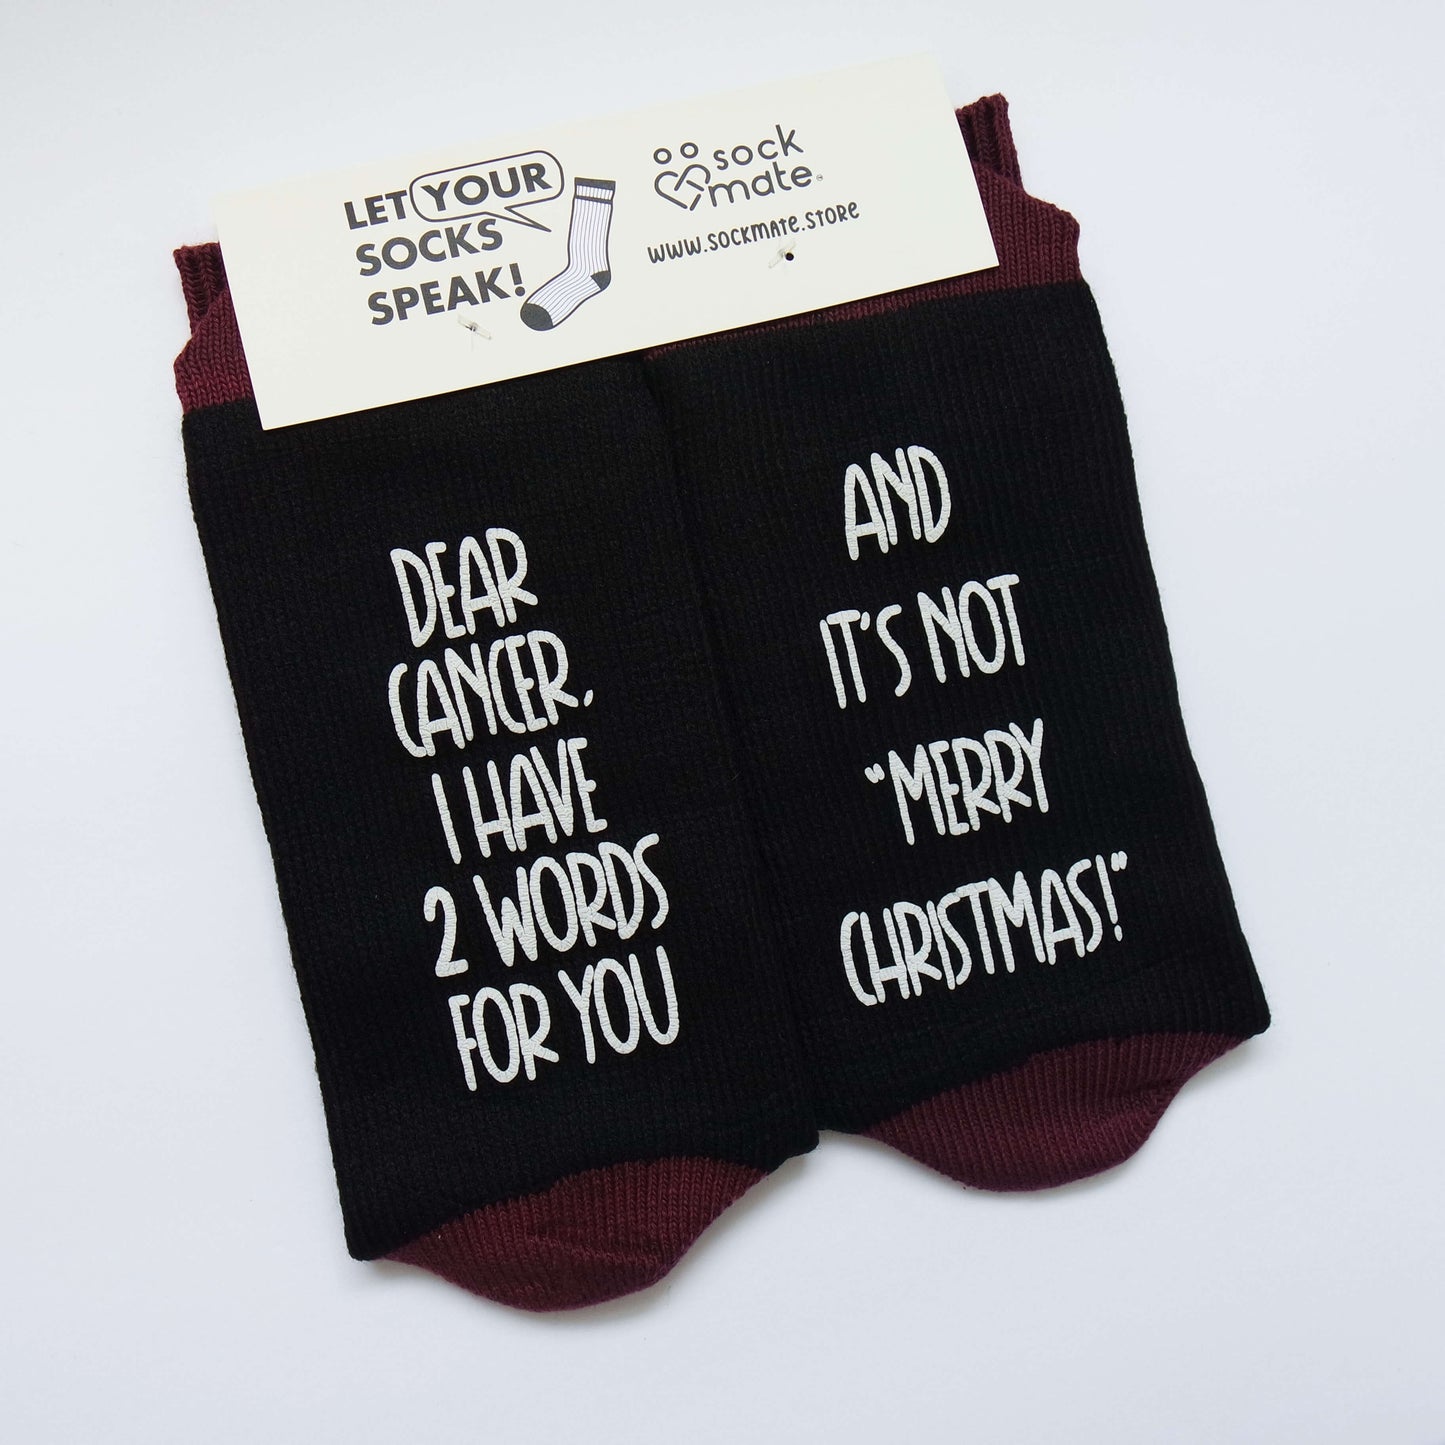 Mens socks with a powerful message for cancer, embodying determination and courage.